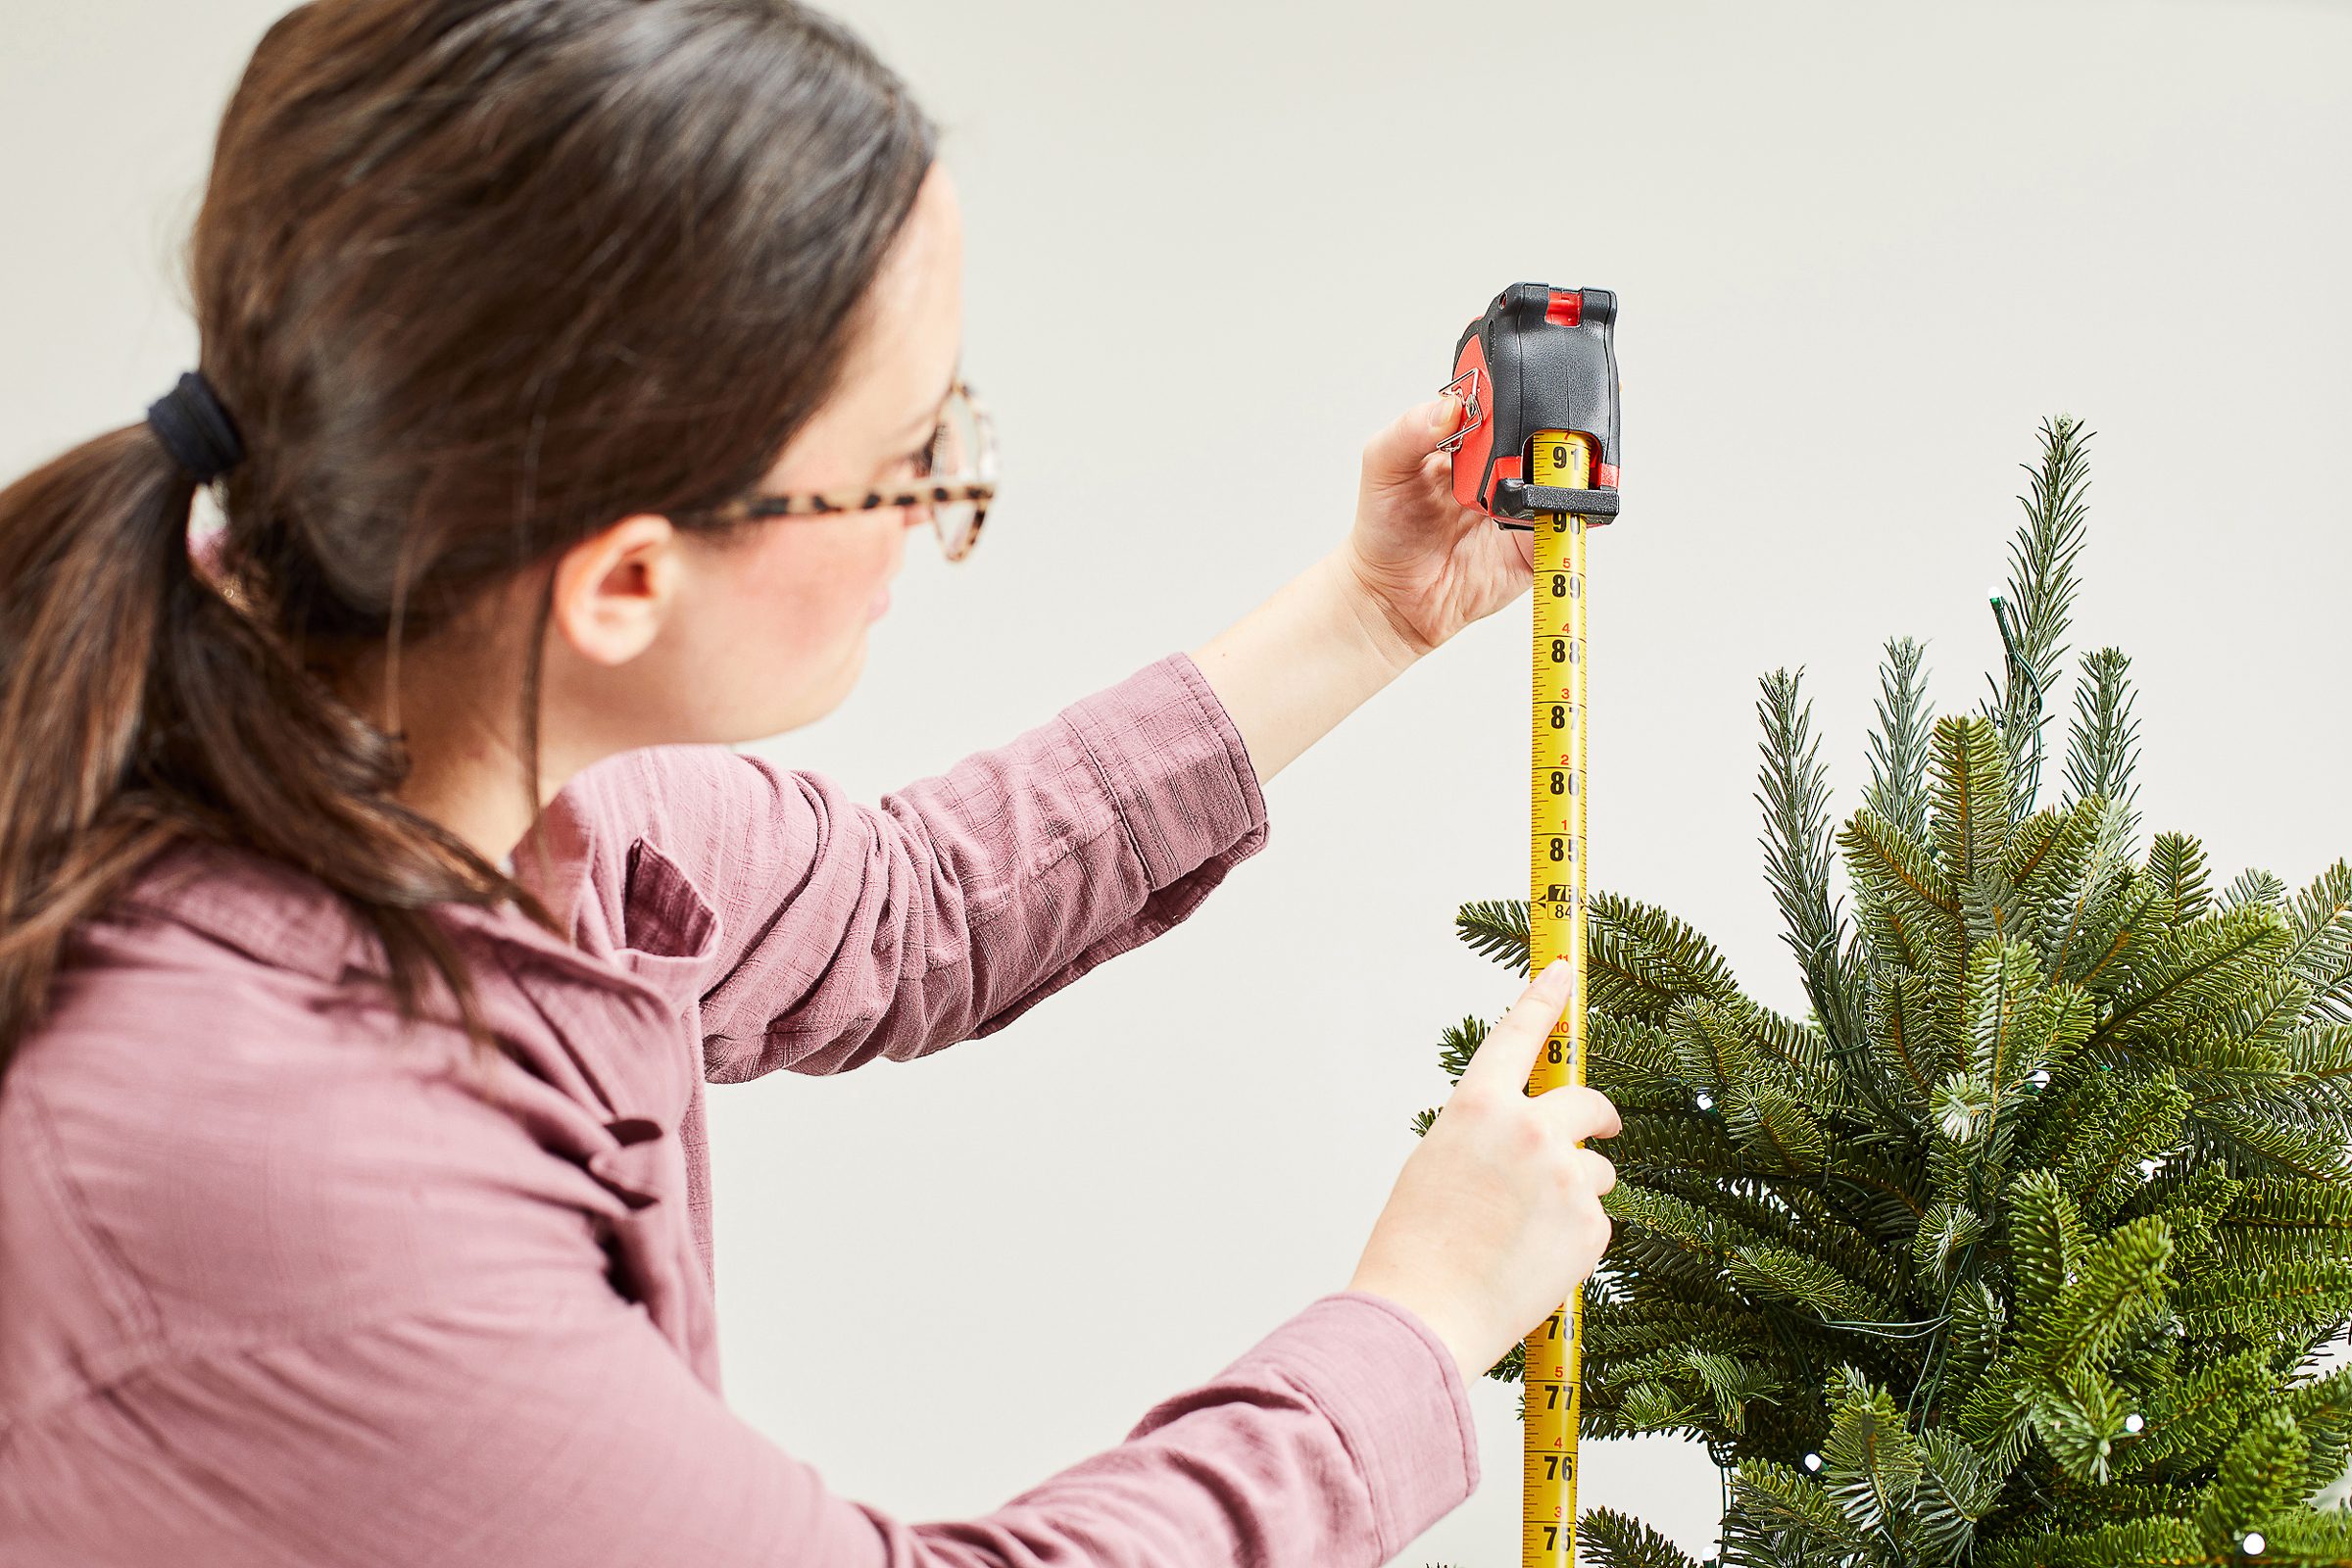 setting up smart twinkly tree